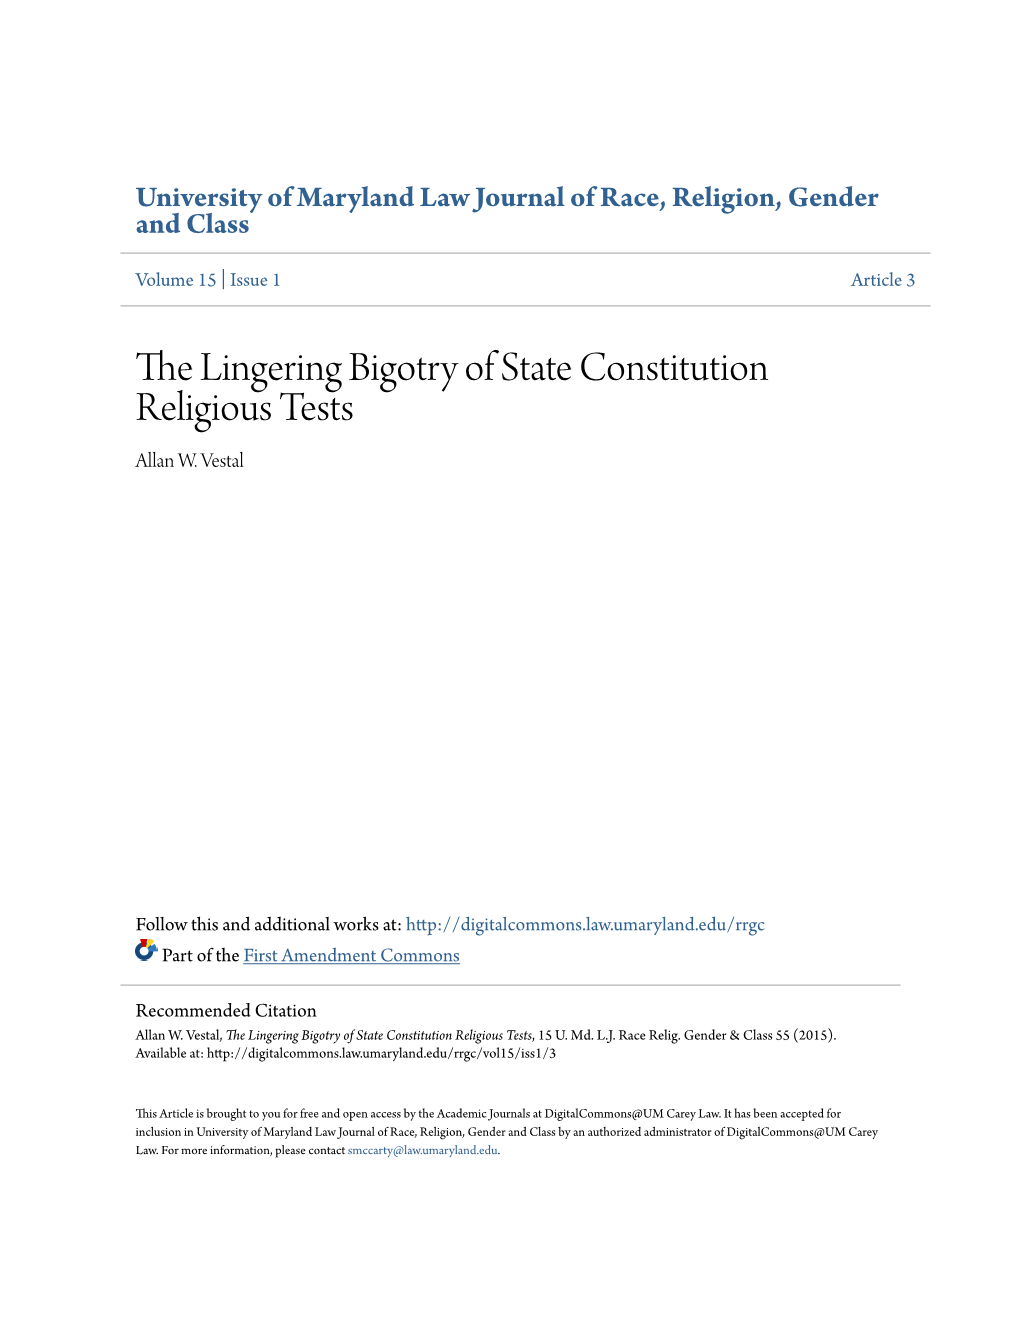 The Lingering Bigotry of State Constitution Religious Tests Allan W